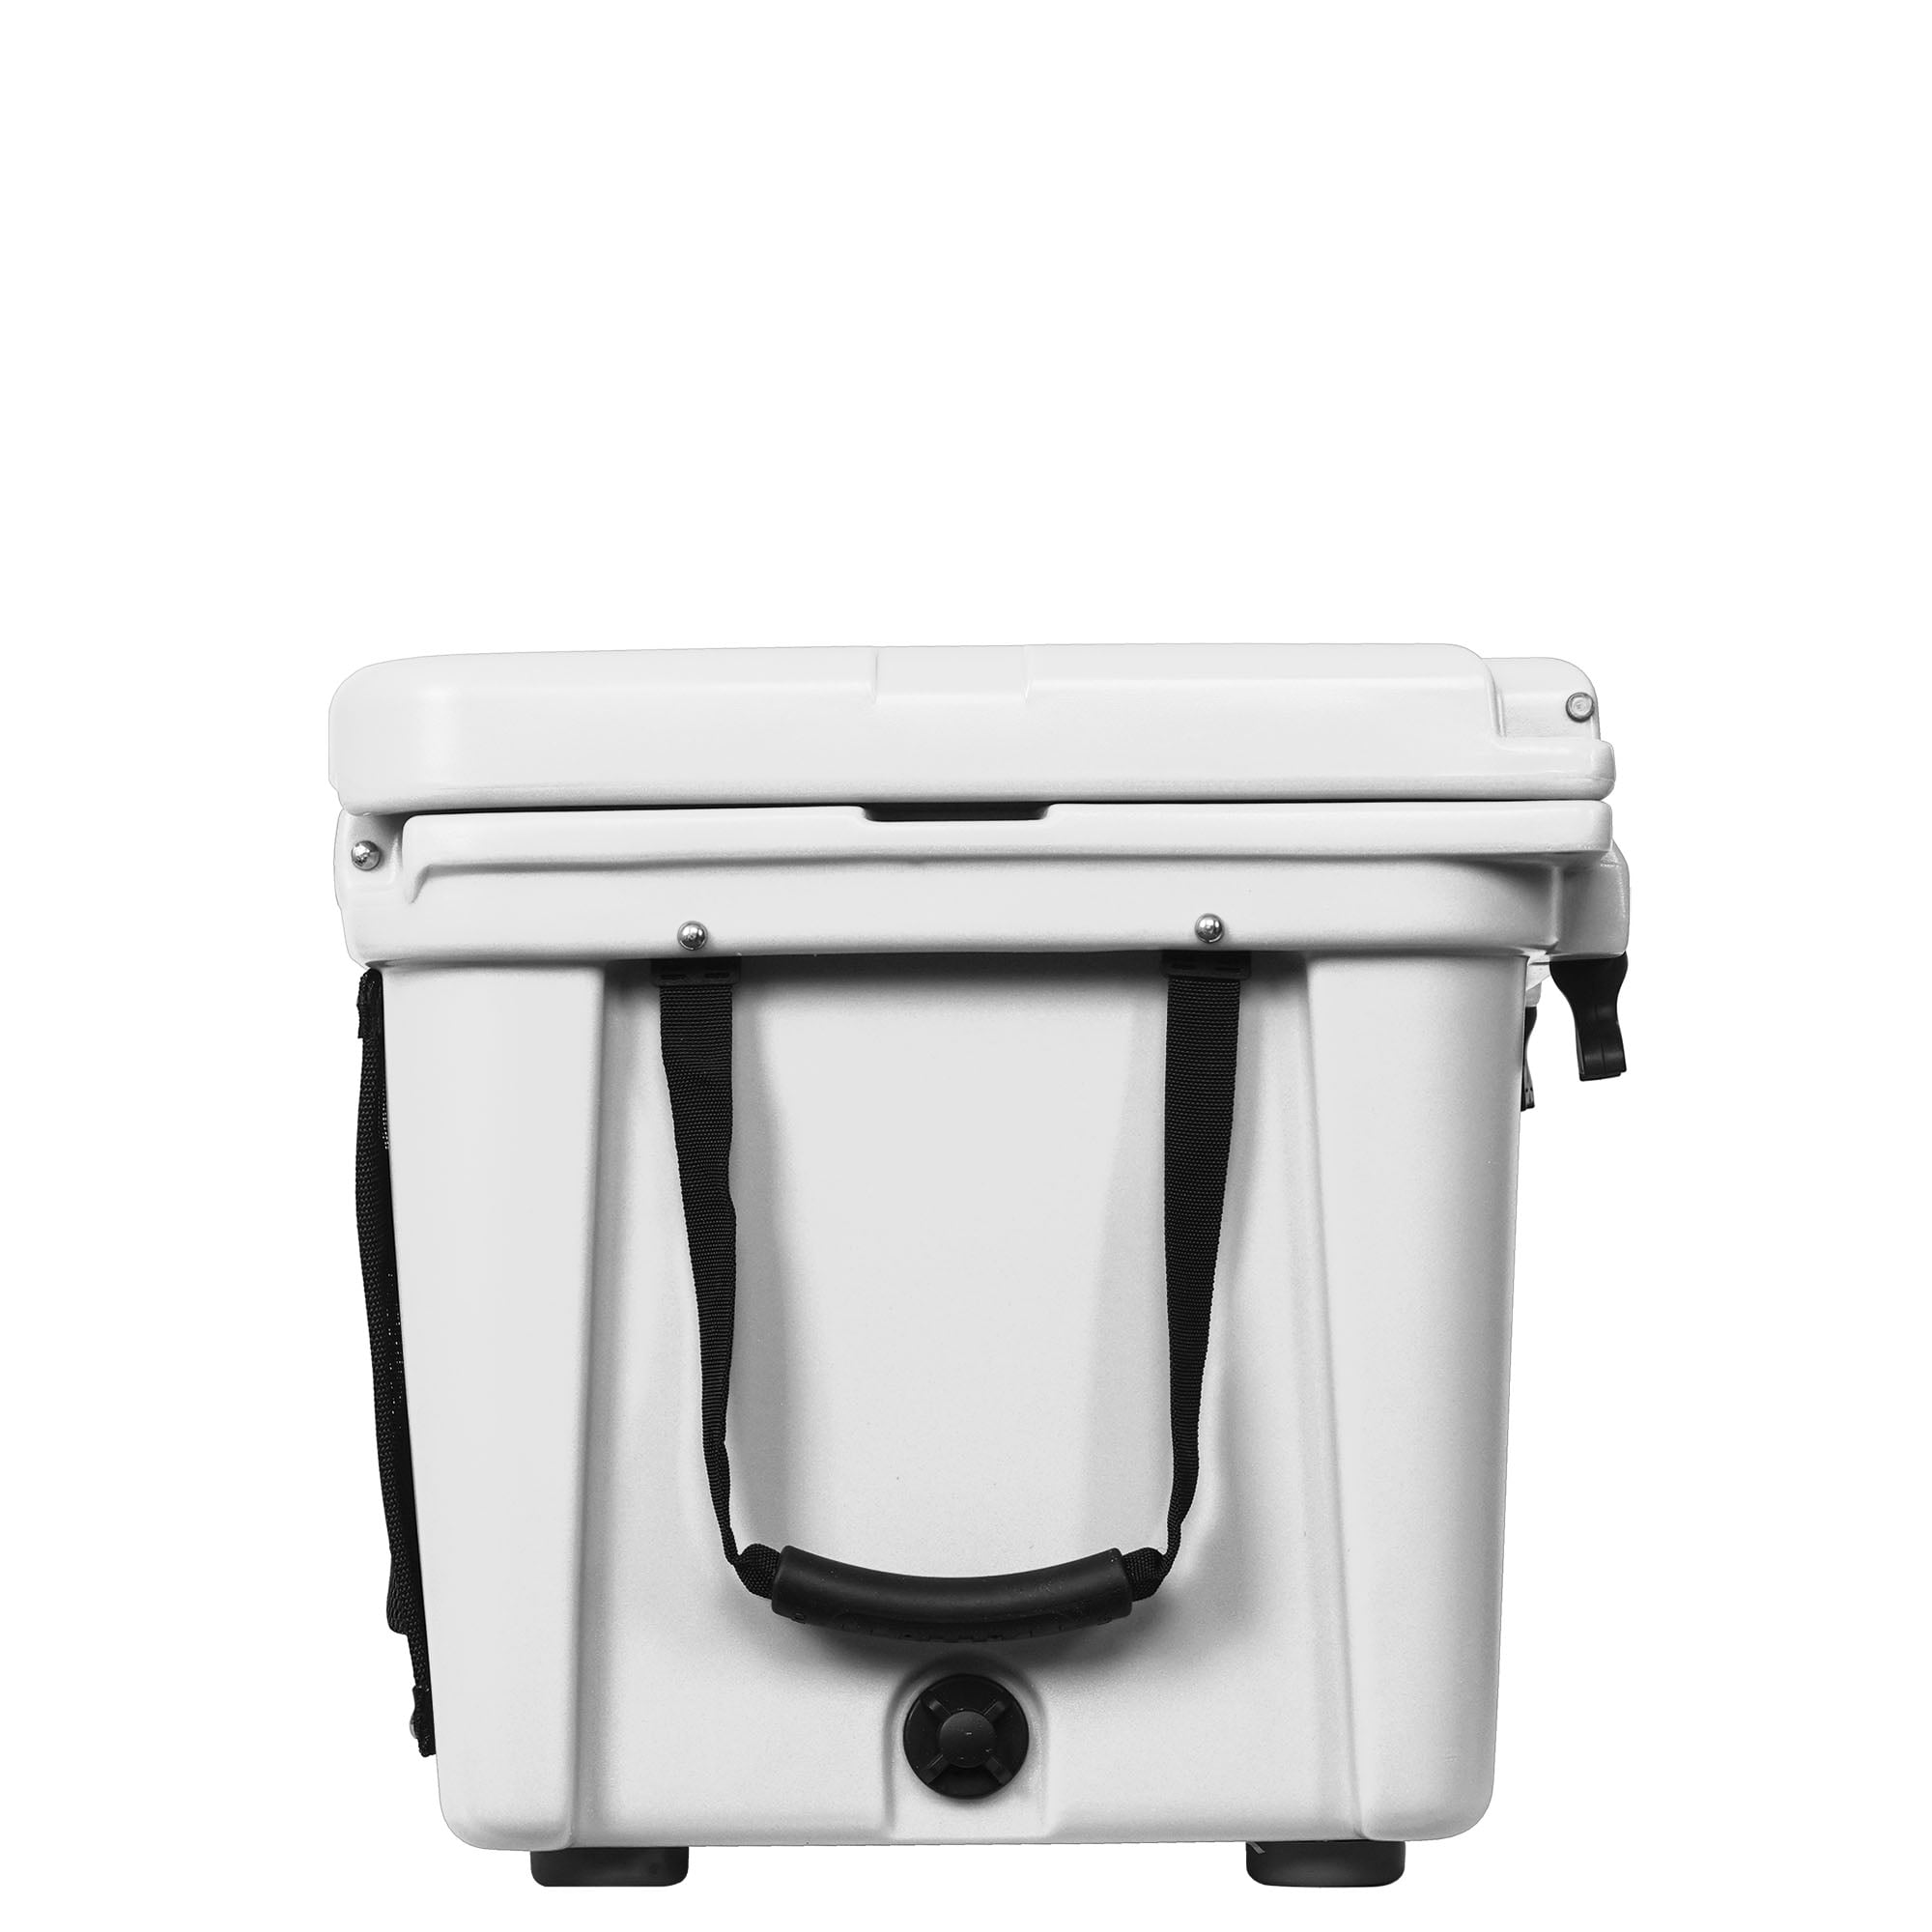 ORCA 40 Quart Hard Cooler Insulated Portable Ice Chest, White